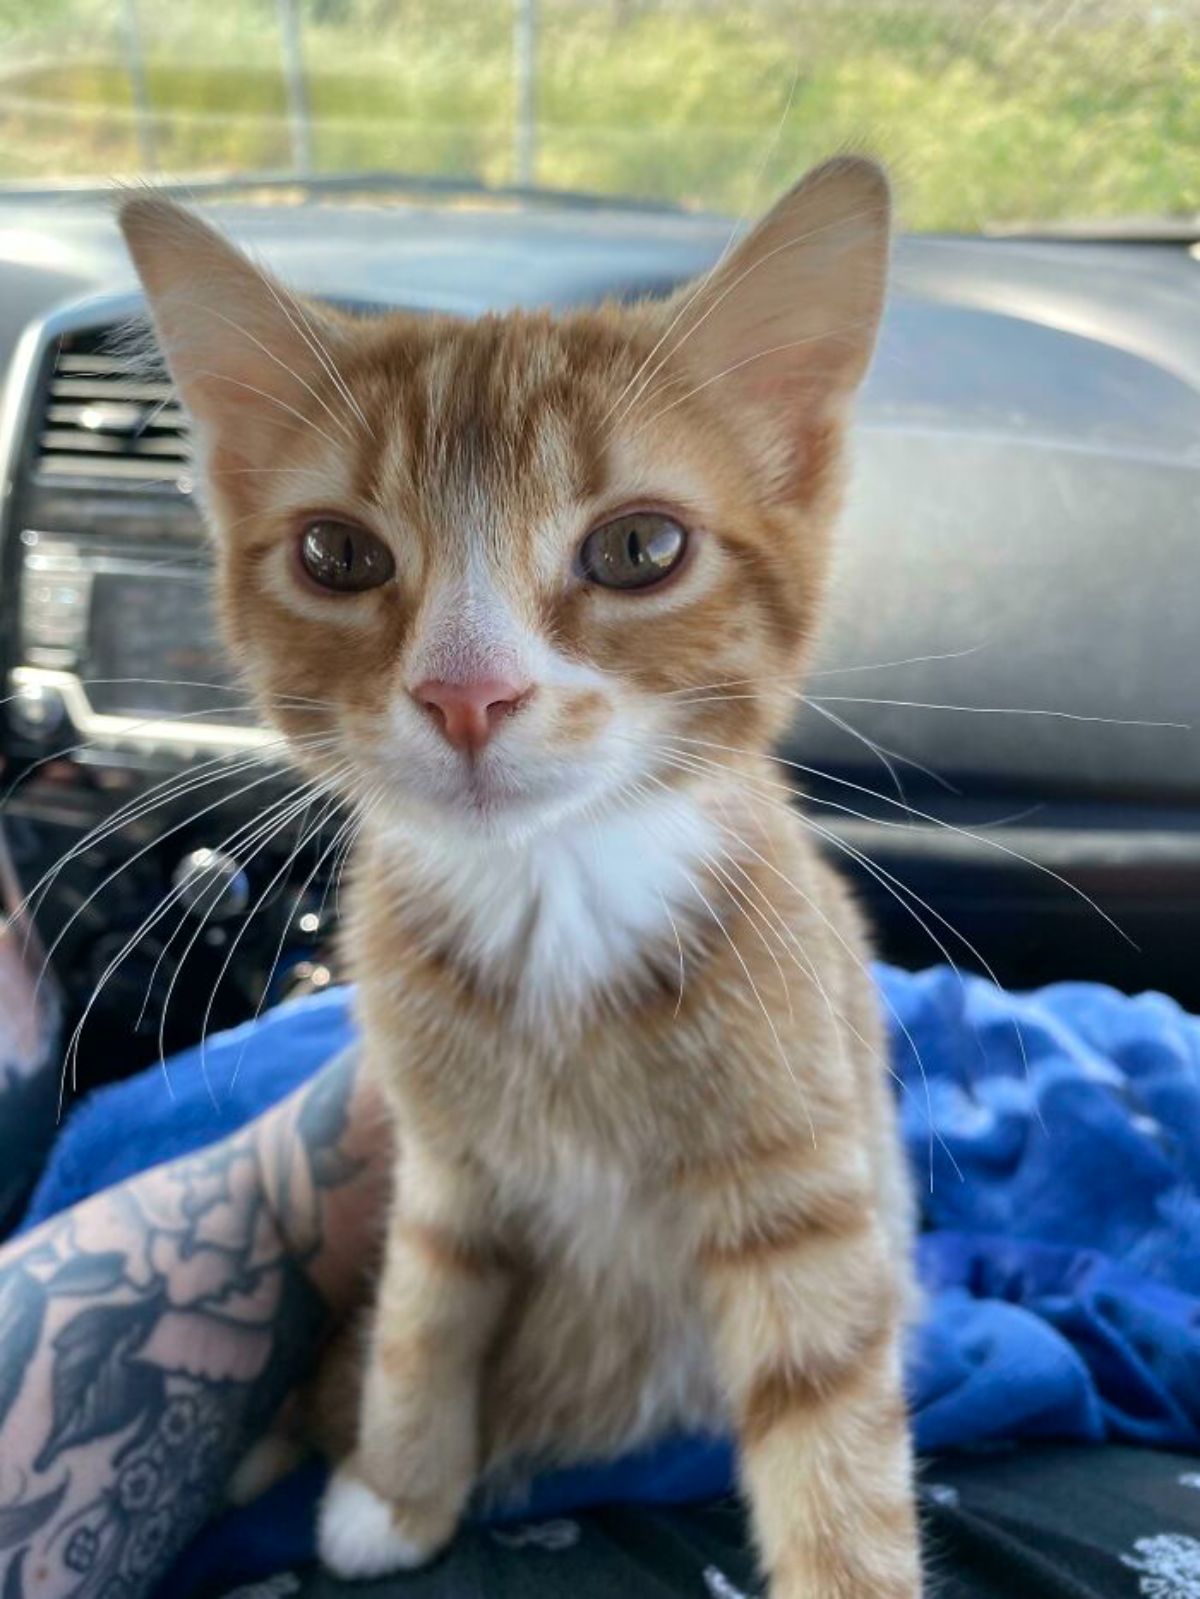 orange and white kitten being held by someone in a vehicle